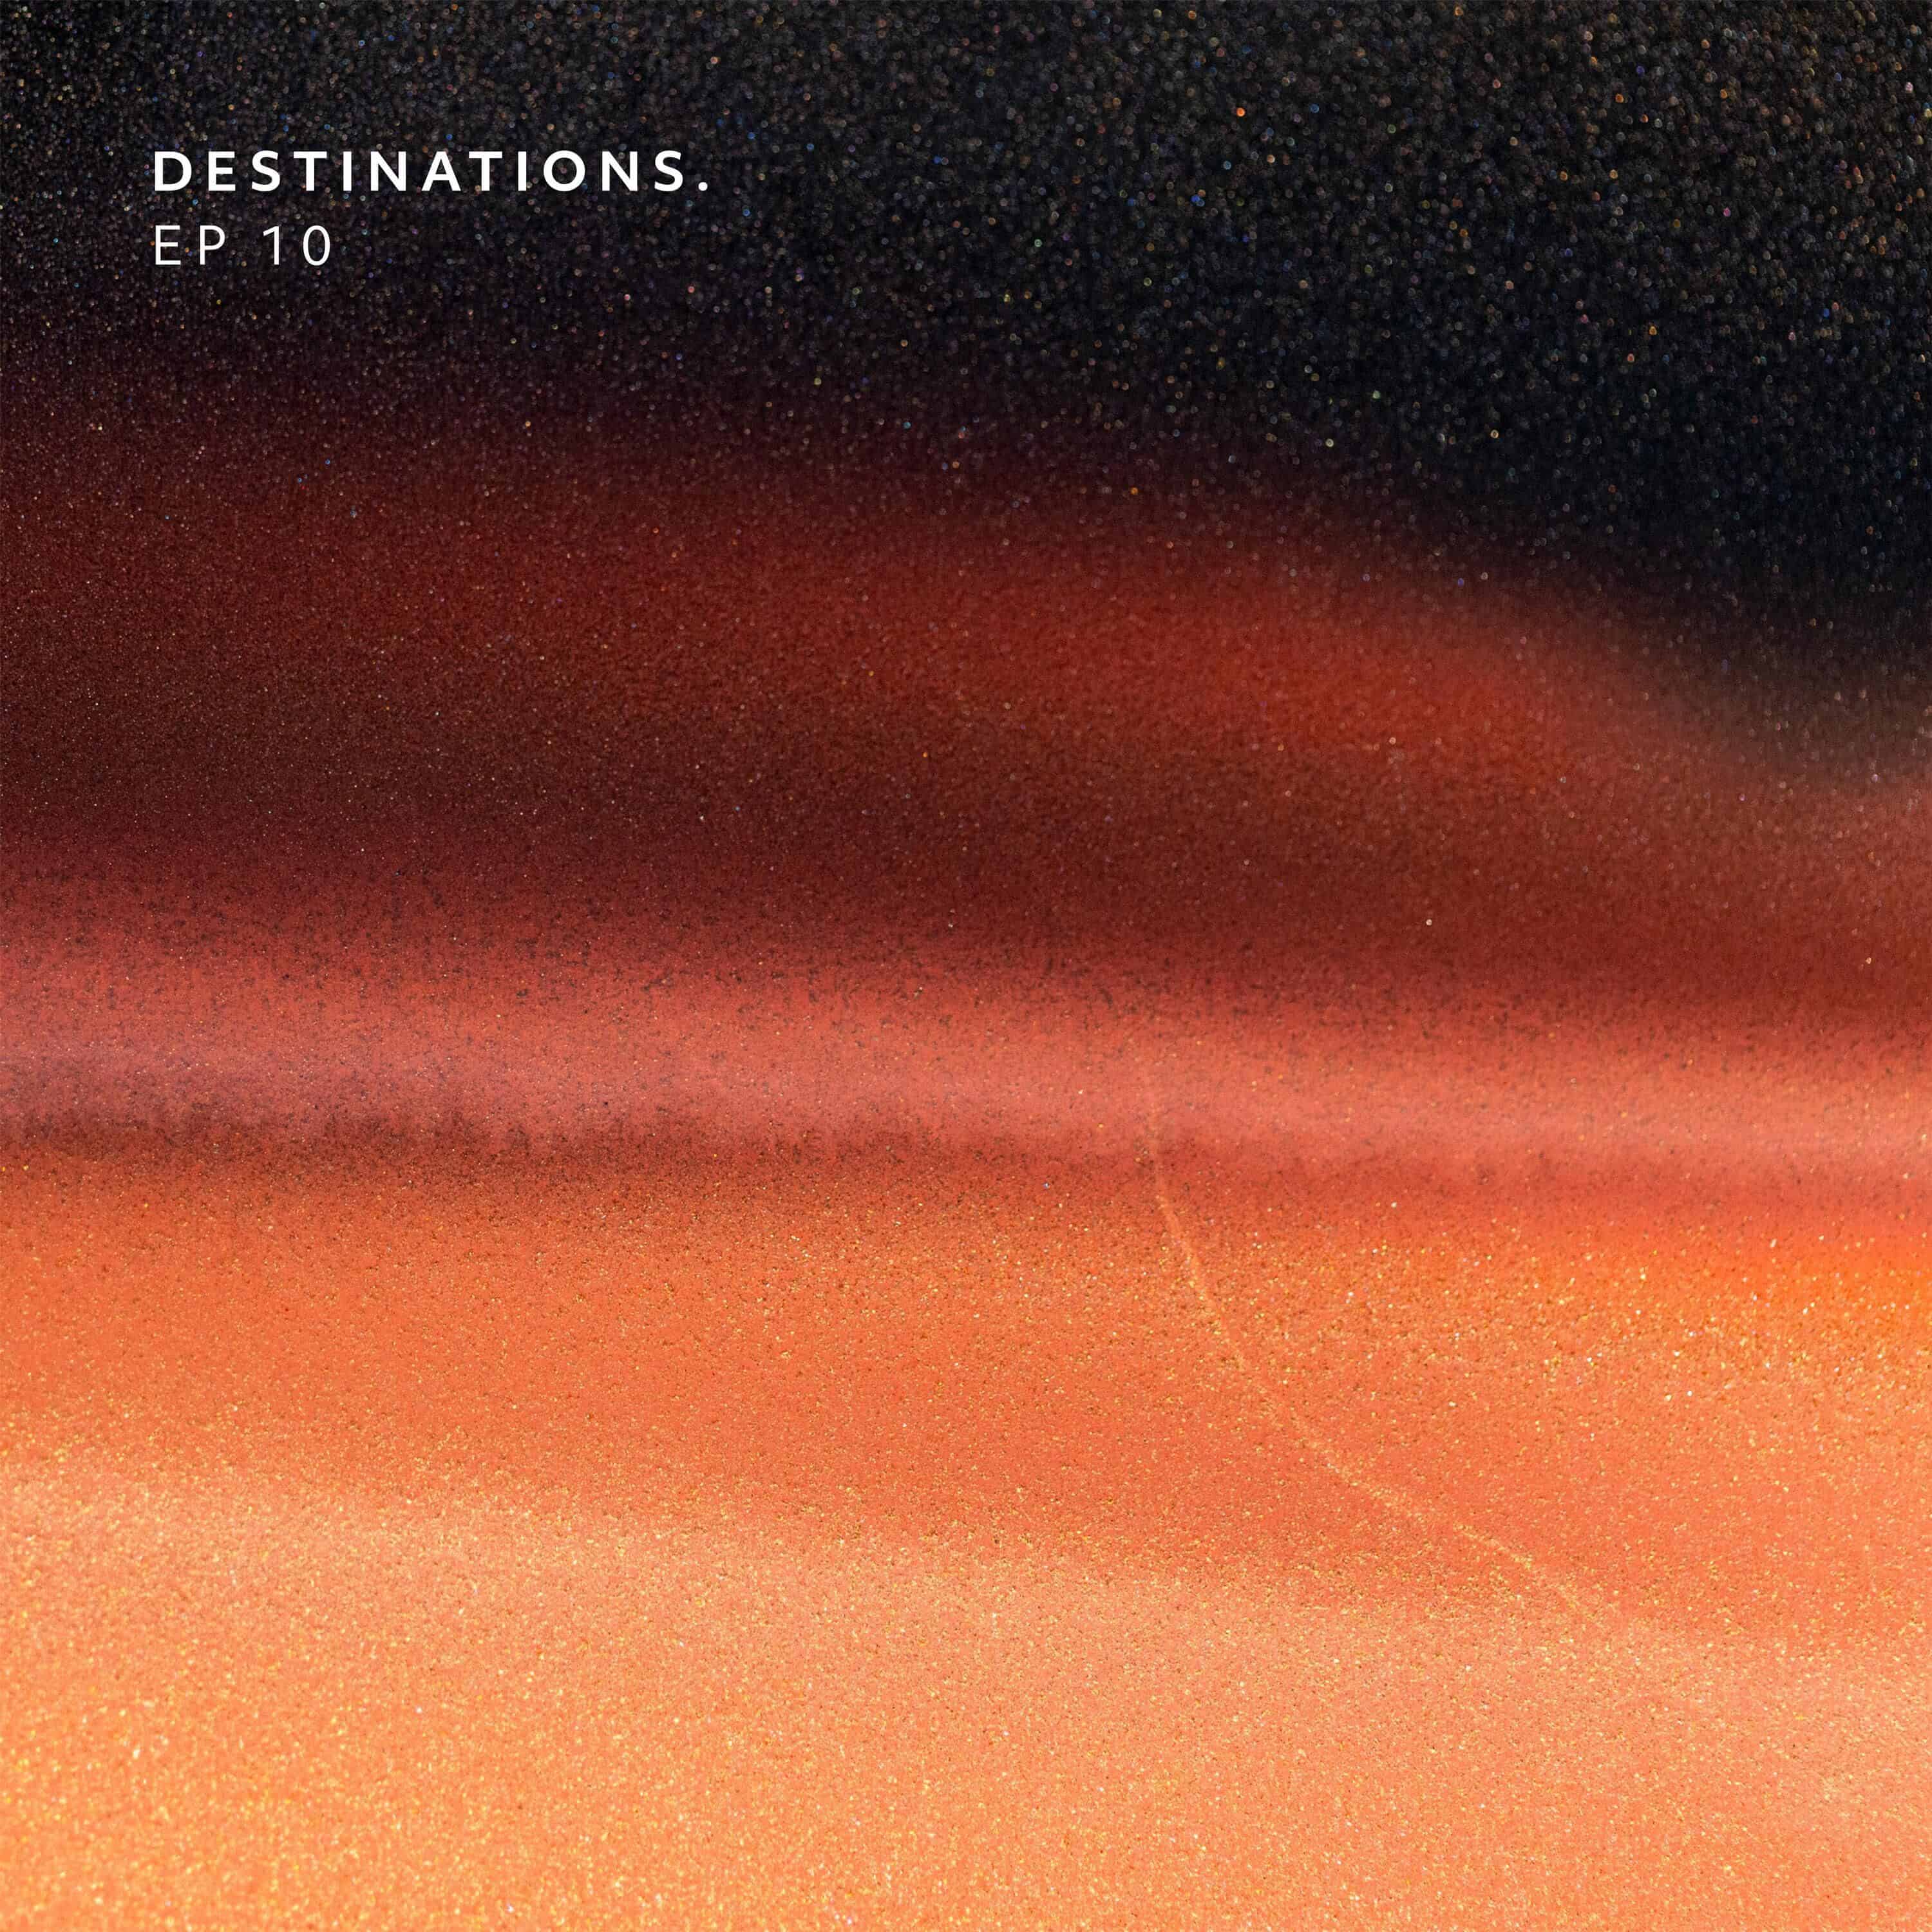 Download Azidax - Destinations. EP 10 on Electrobuzz